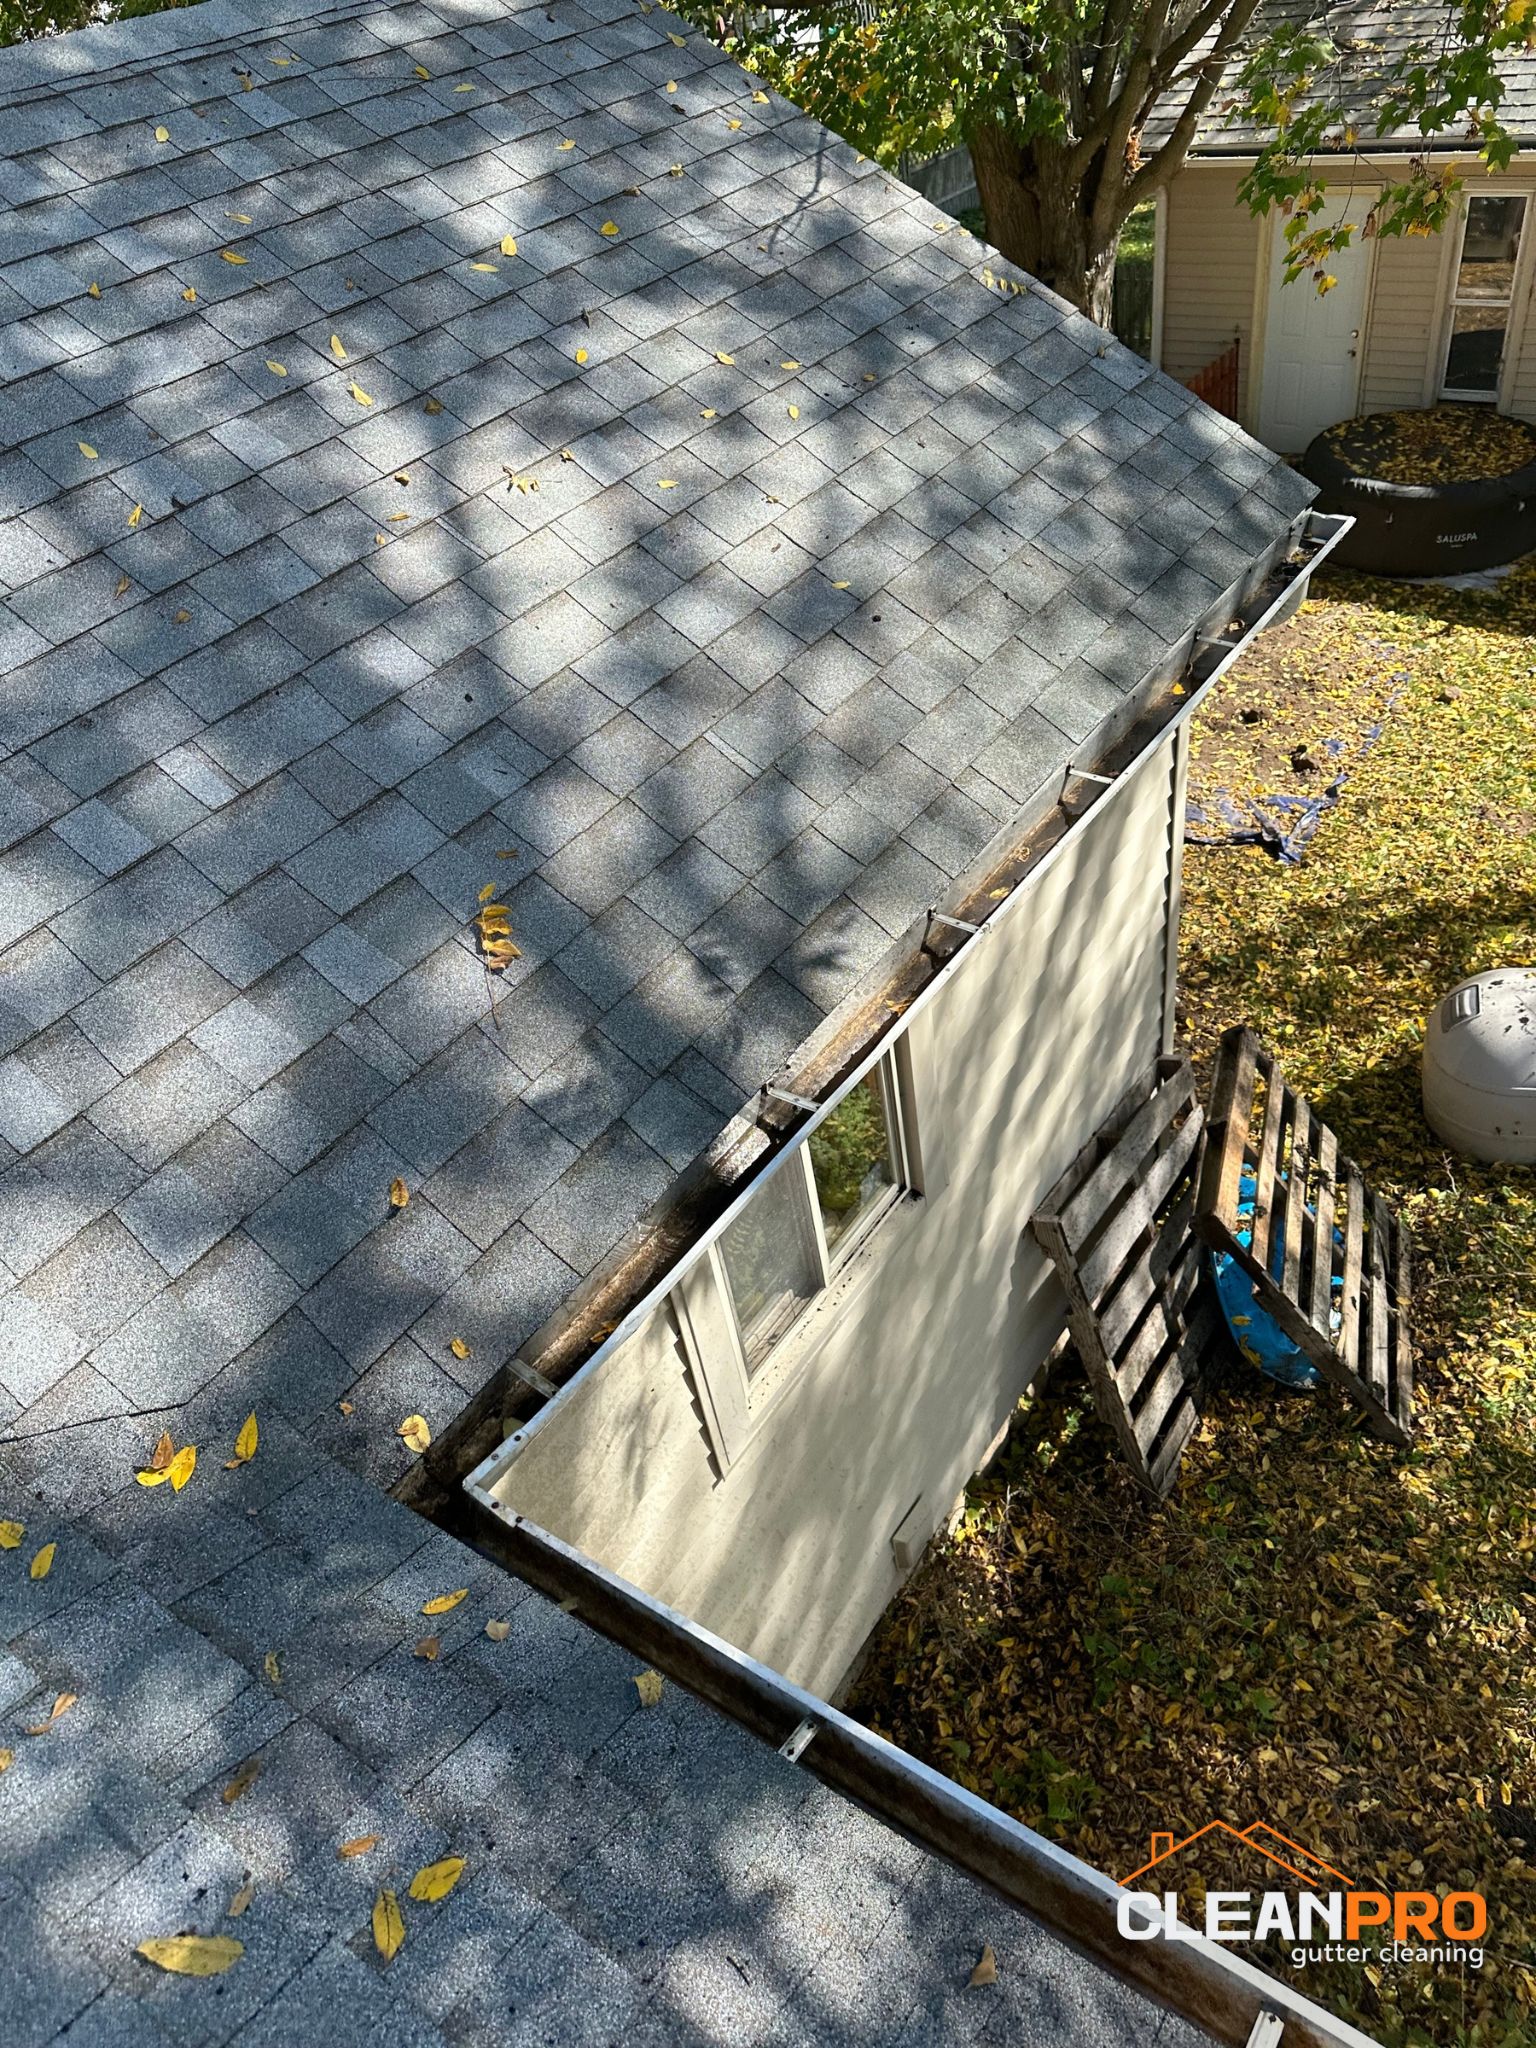 Quality Gutter Cleaning in Oklahoma City OK